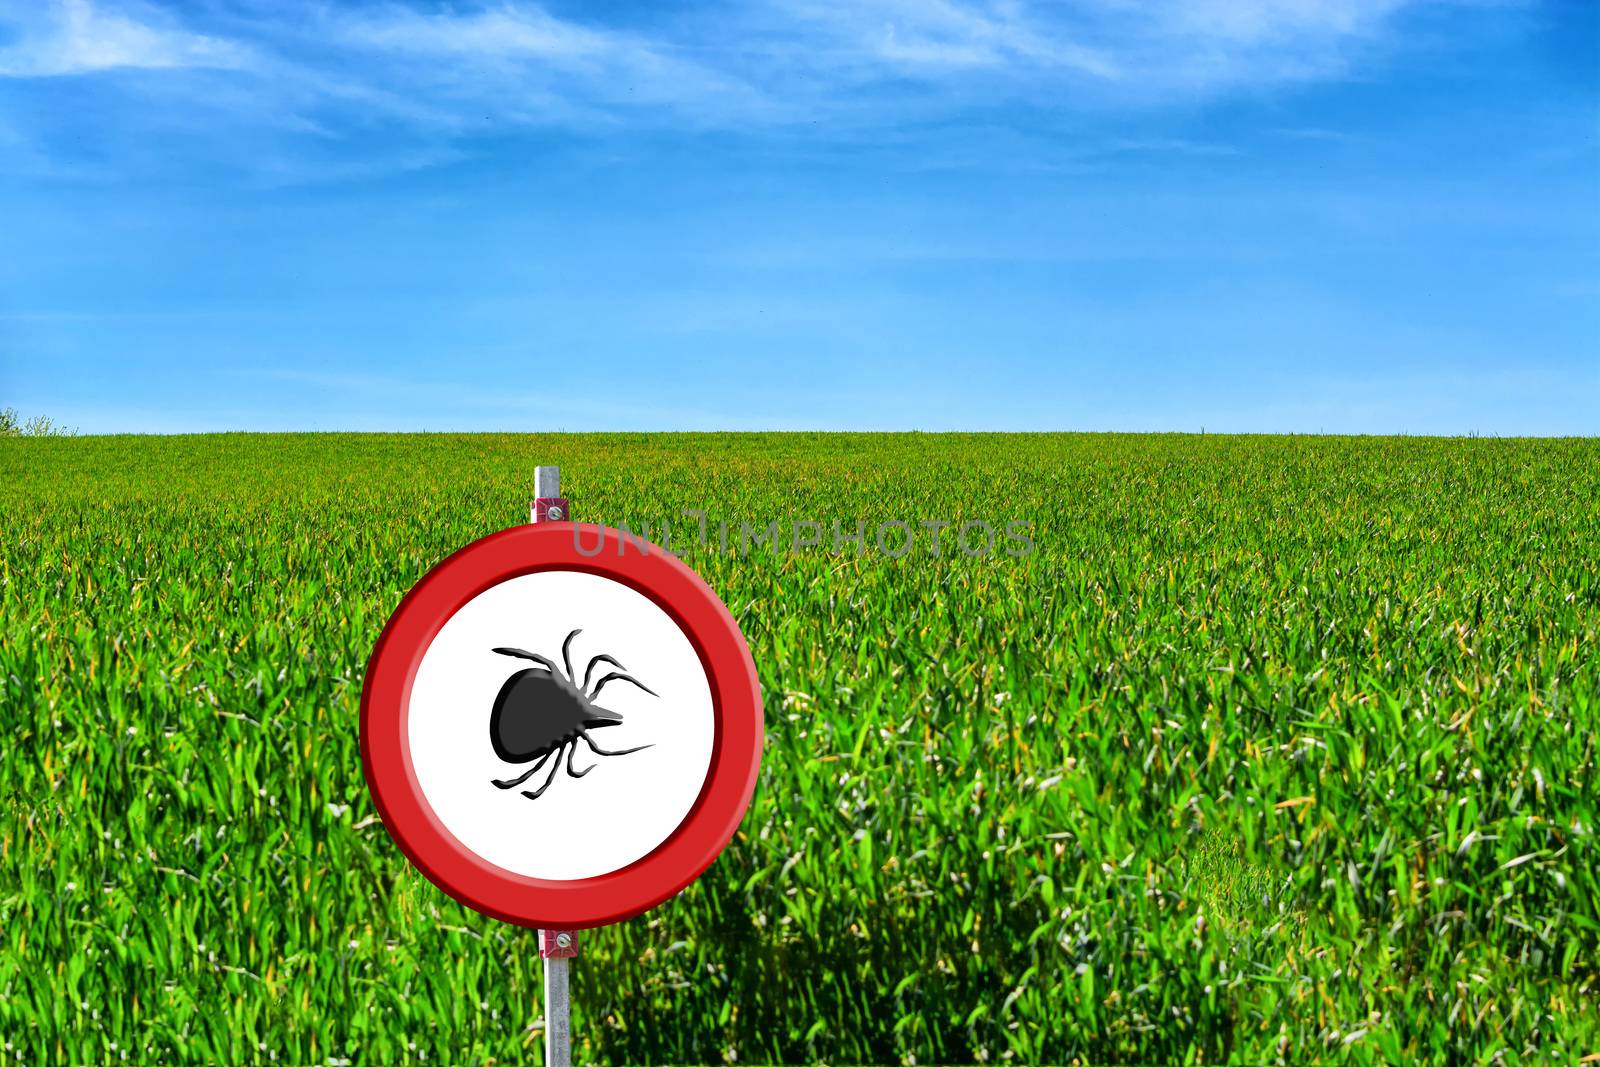 Borreliose and tick warning, round red warning sign with tick symbol in front of a green meadow.